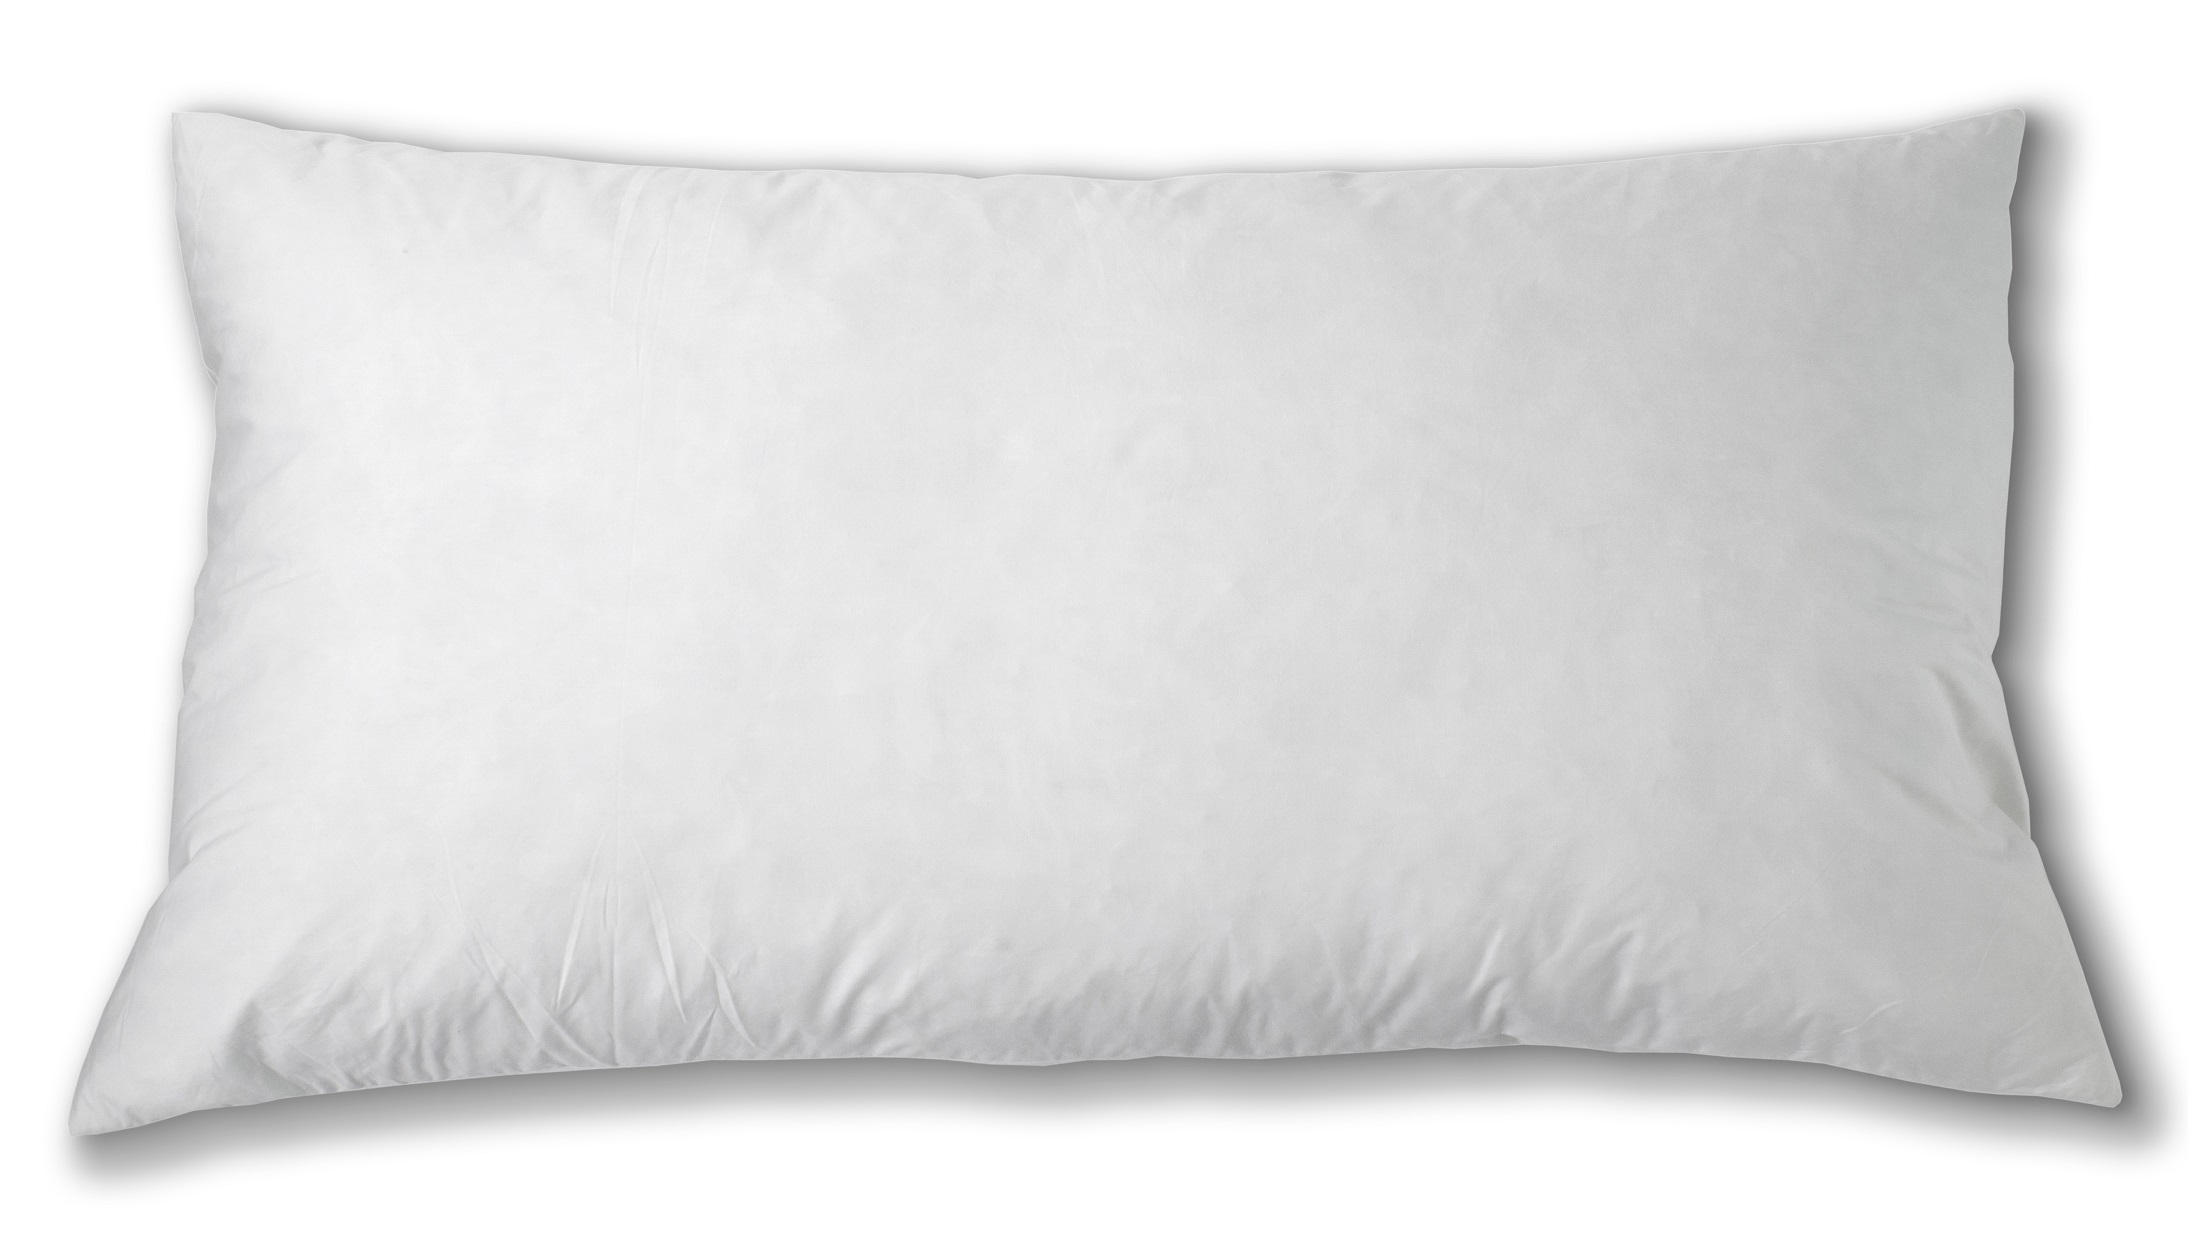 Compartment Pillow King 20"x36"